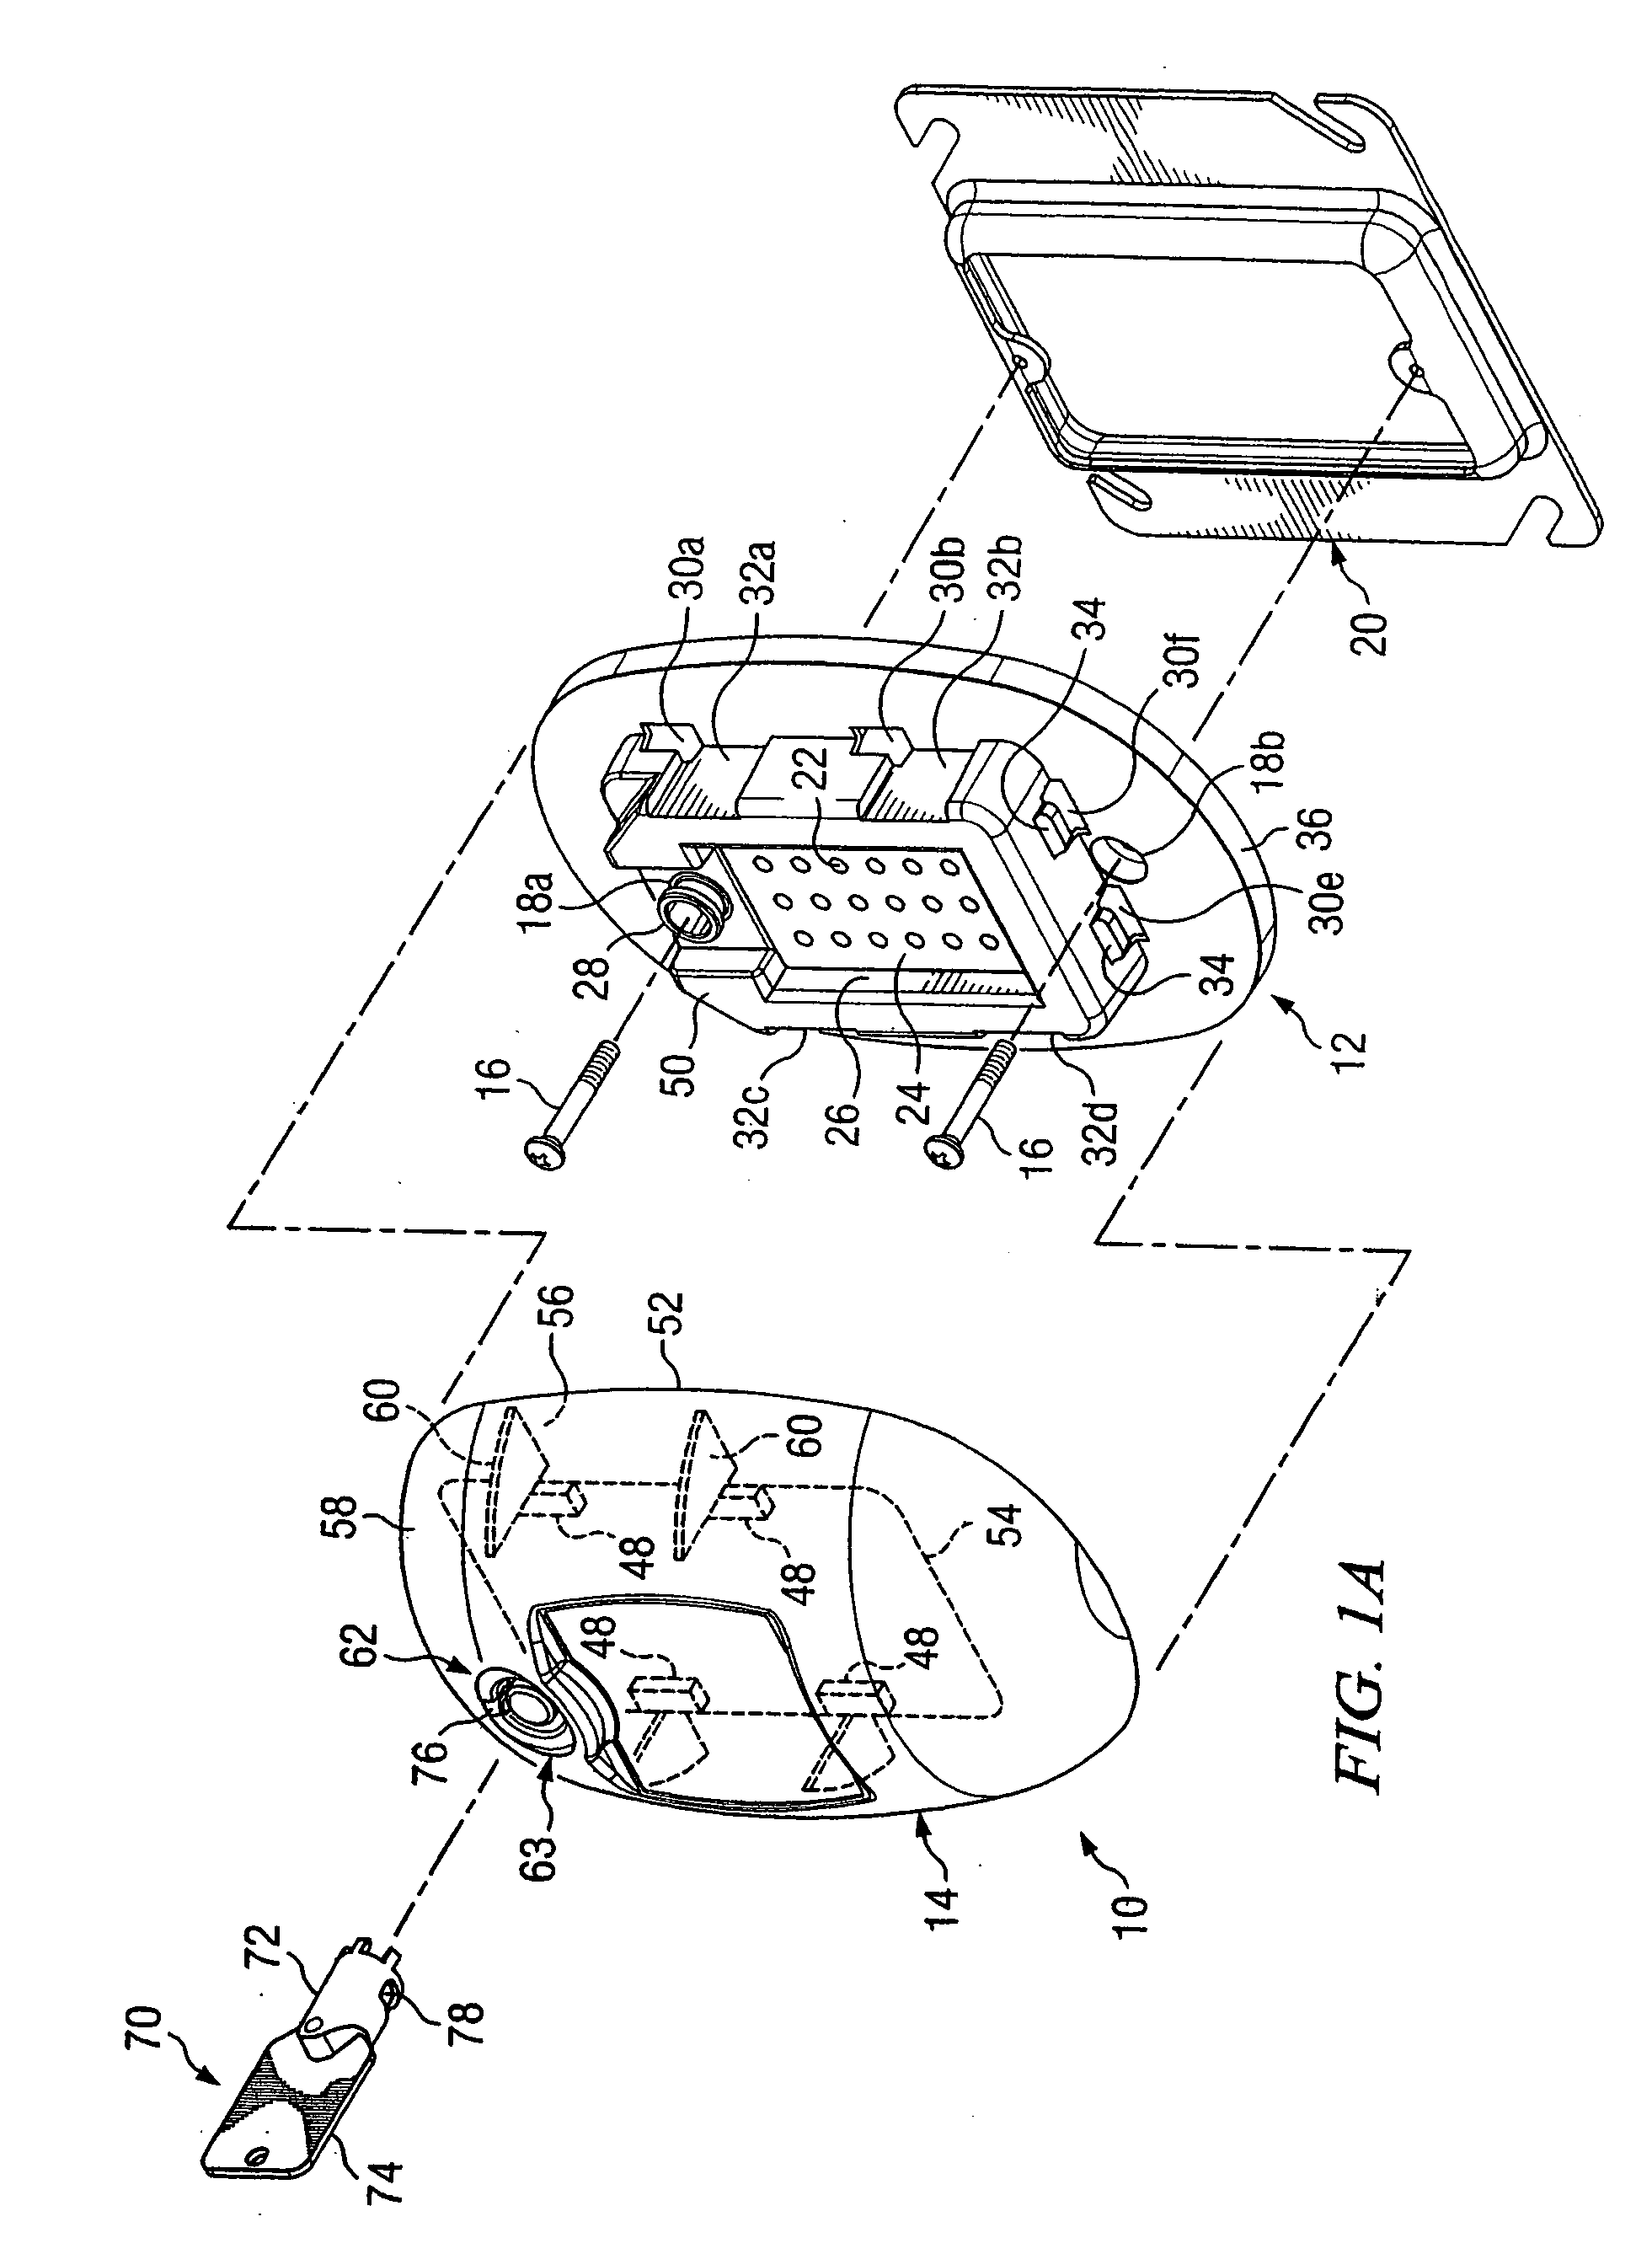 Method for protecting from unauthorized access one or more ports of a system integrated into a structure for injection of a material into one or more cavities in the structure